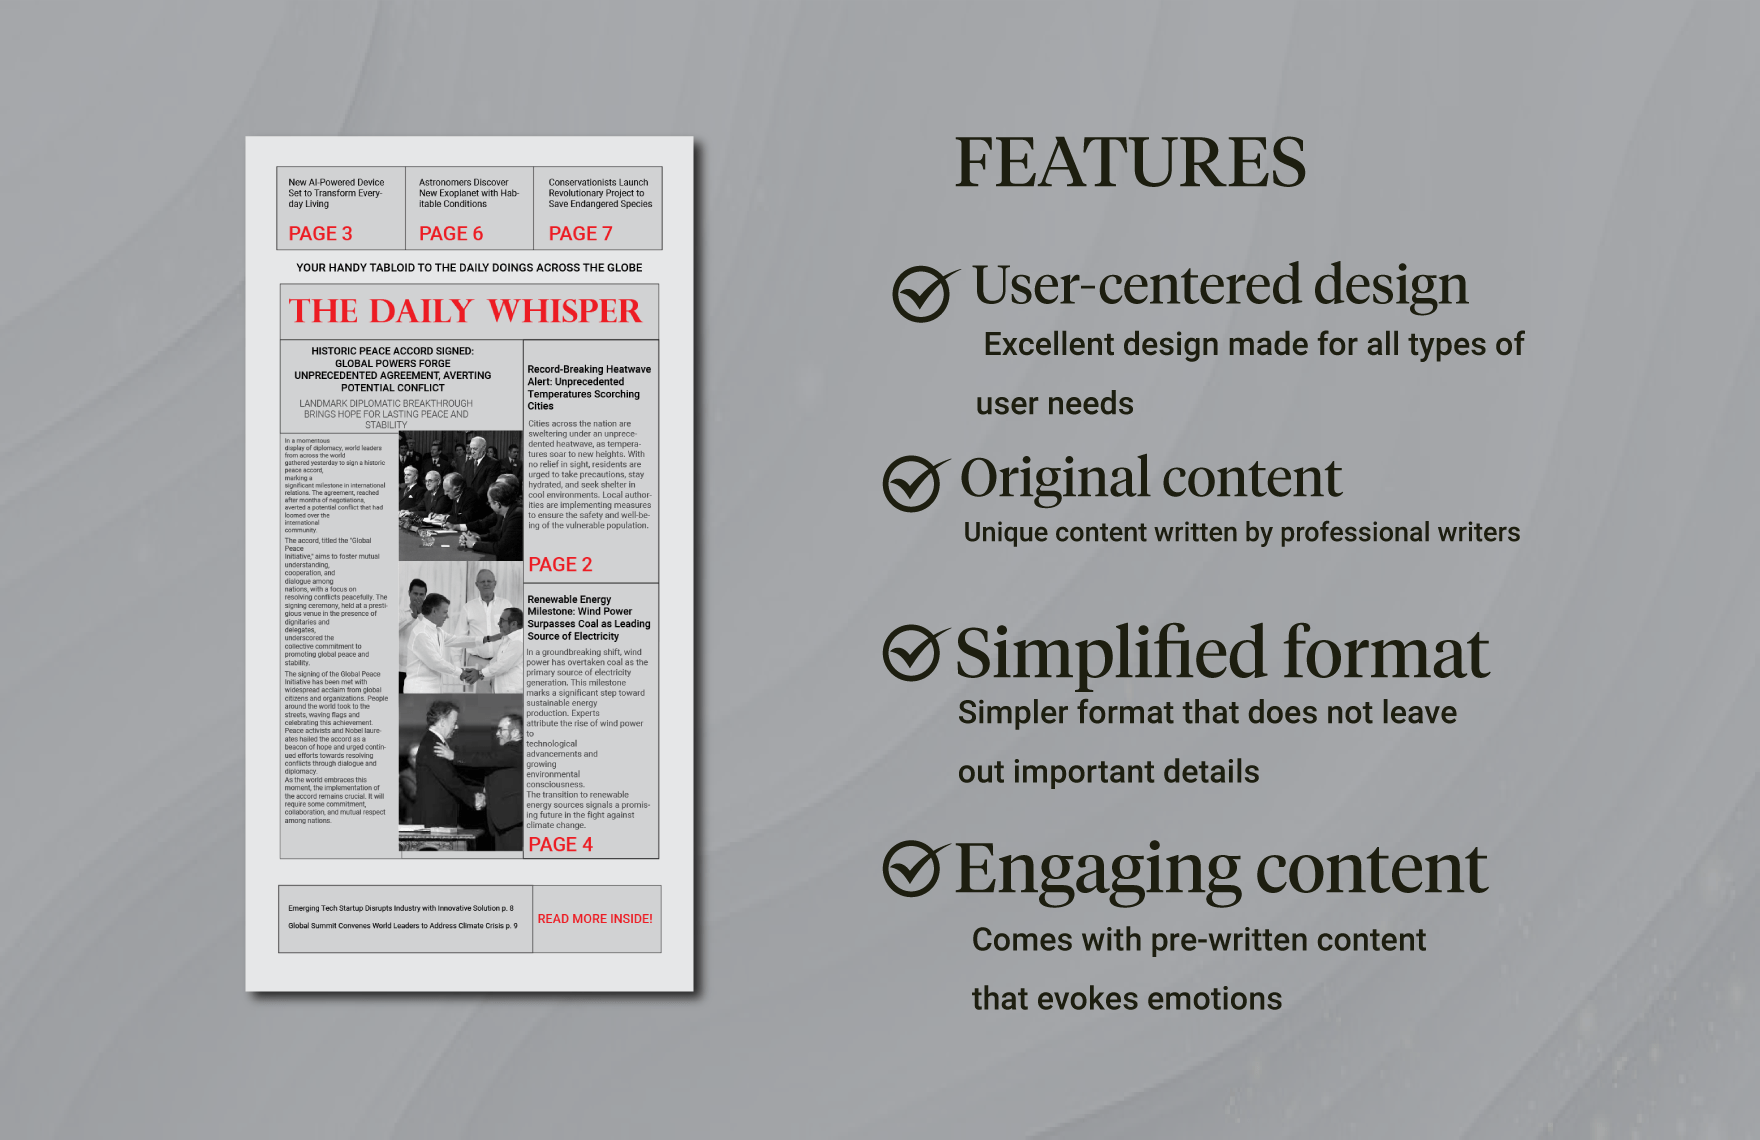 Daily Tabloid Newspaper Template